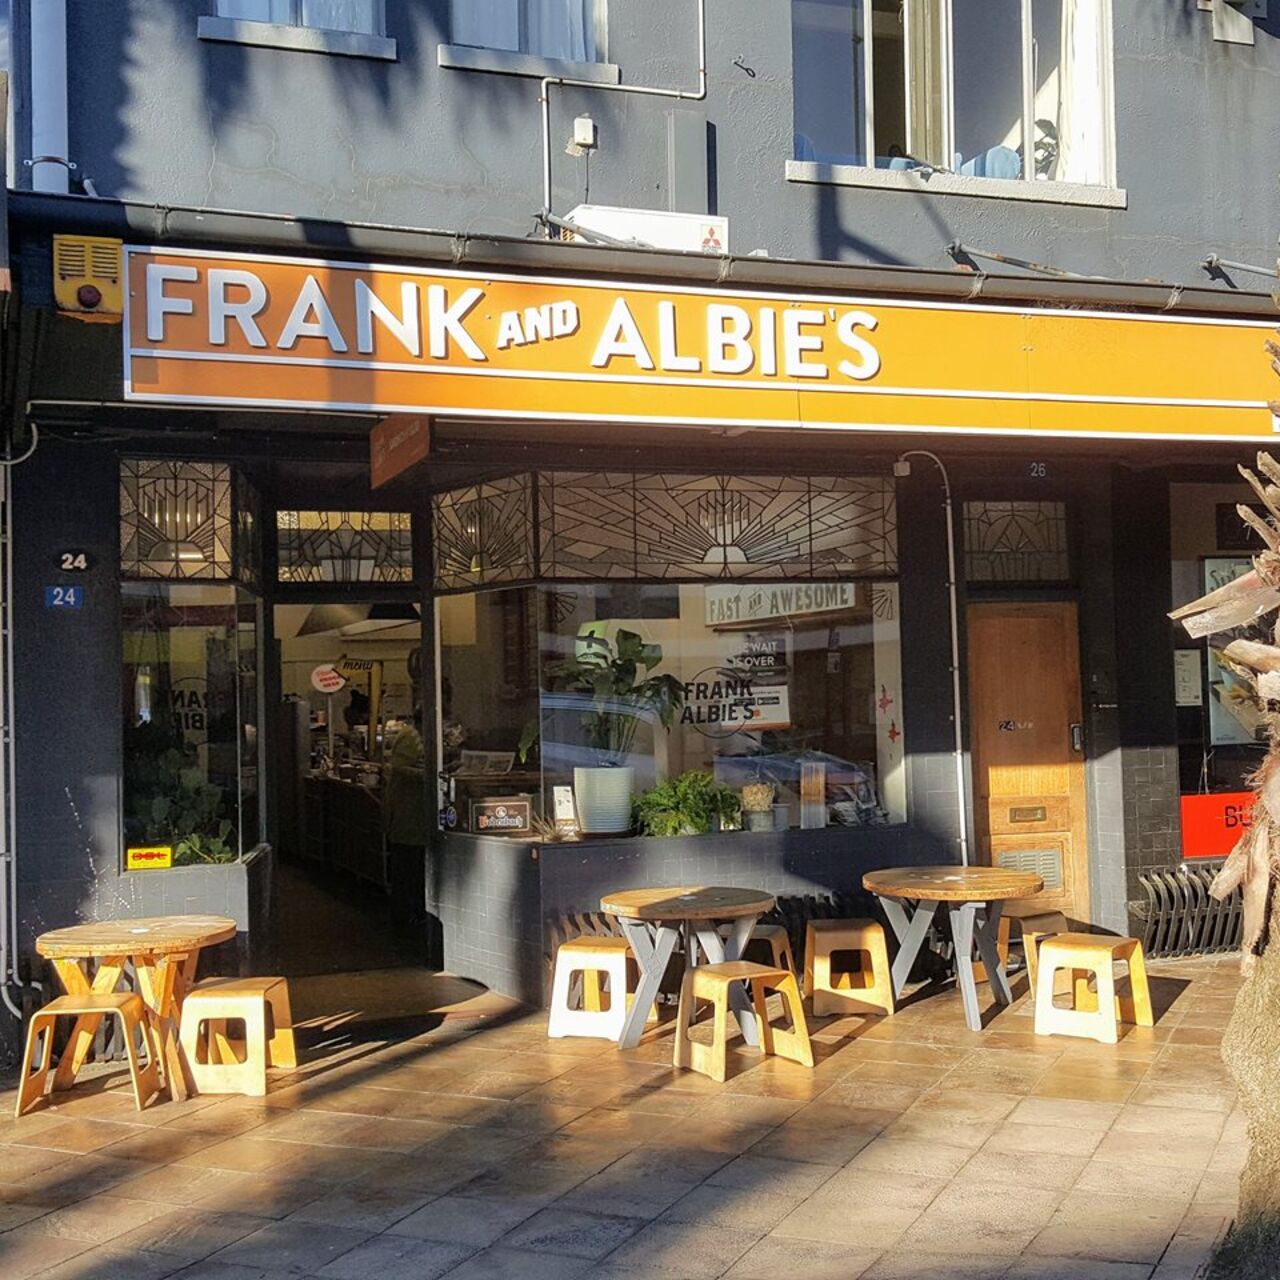 A photo of Frank and Albie's